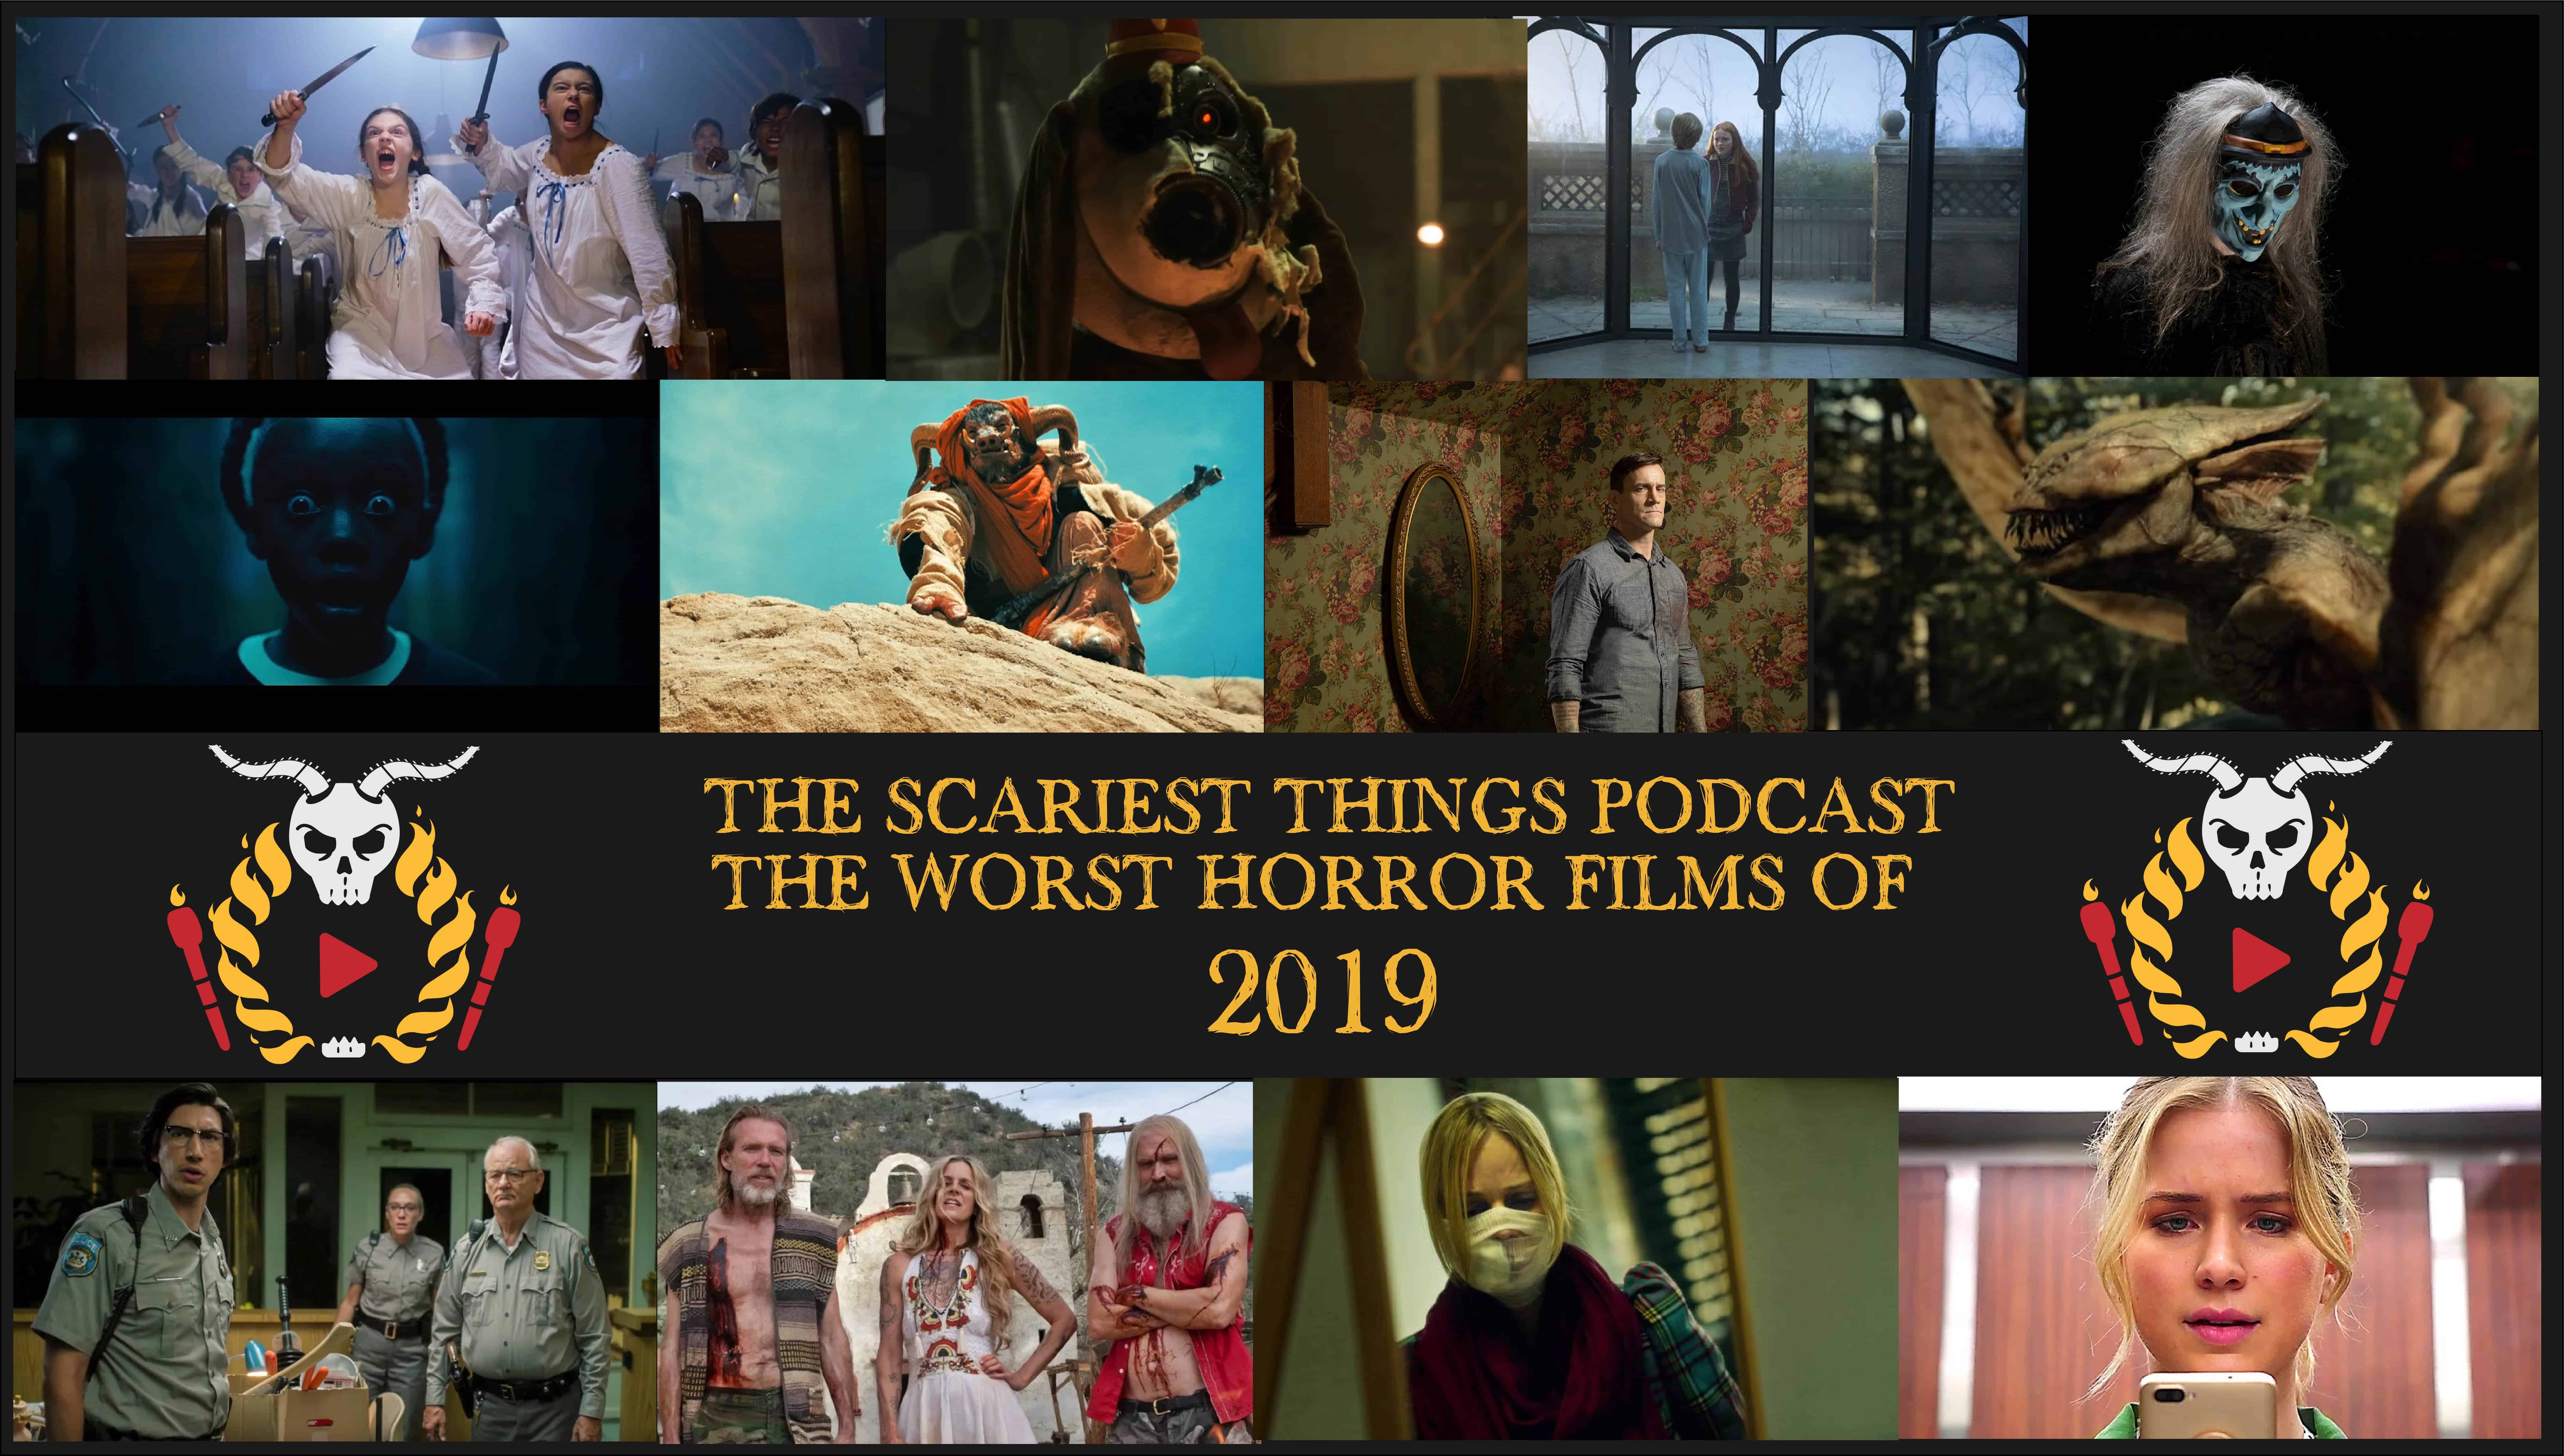 The Scariest Things Podcast Episode LXXXVII: The Worst Horror Films of 2019